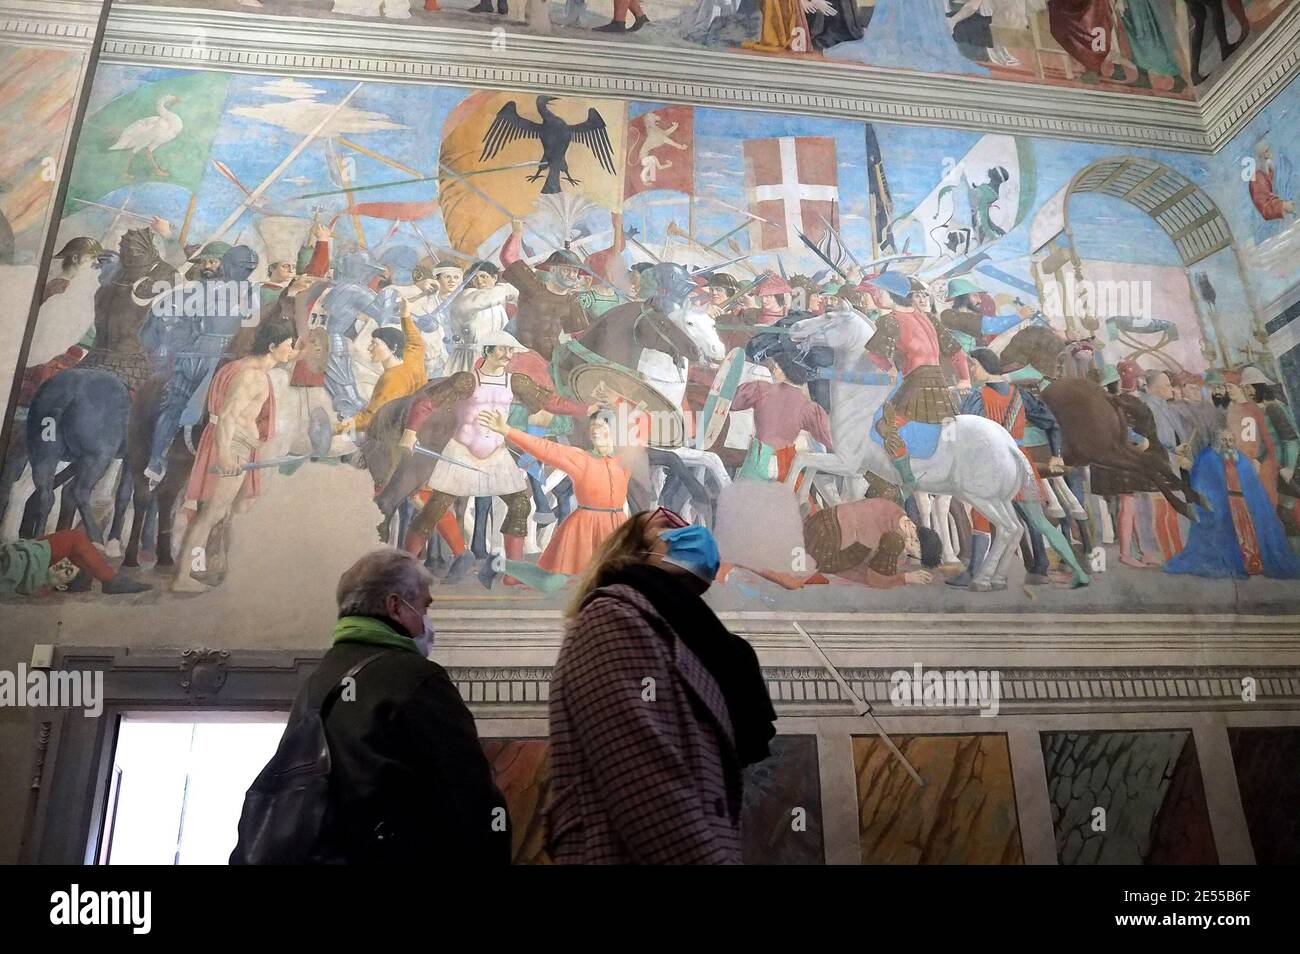 Italy, Tuscany region, Arezzo, January 26, 2021 : Basilica of San Francesco, the frescoes  'The Stories of the True Cross' painted by Piero della Francesca, today reopening after the closure due the covid-19 pandemic. In the picture visitors wear protetion masks while visiting the exposition.   Photo © Daiano Cristini/Sintesi/Alamy Live News Stock Photo